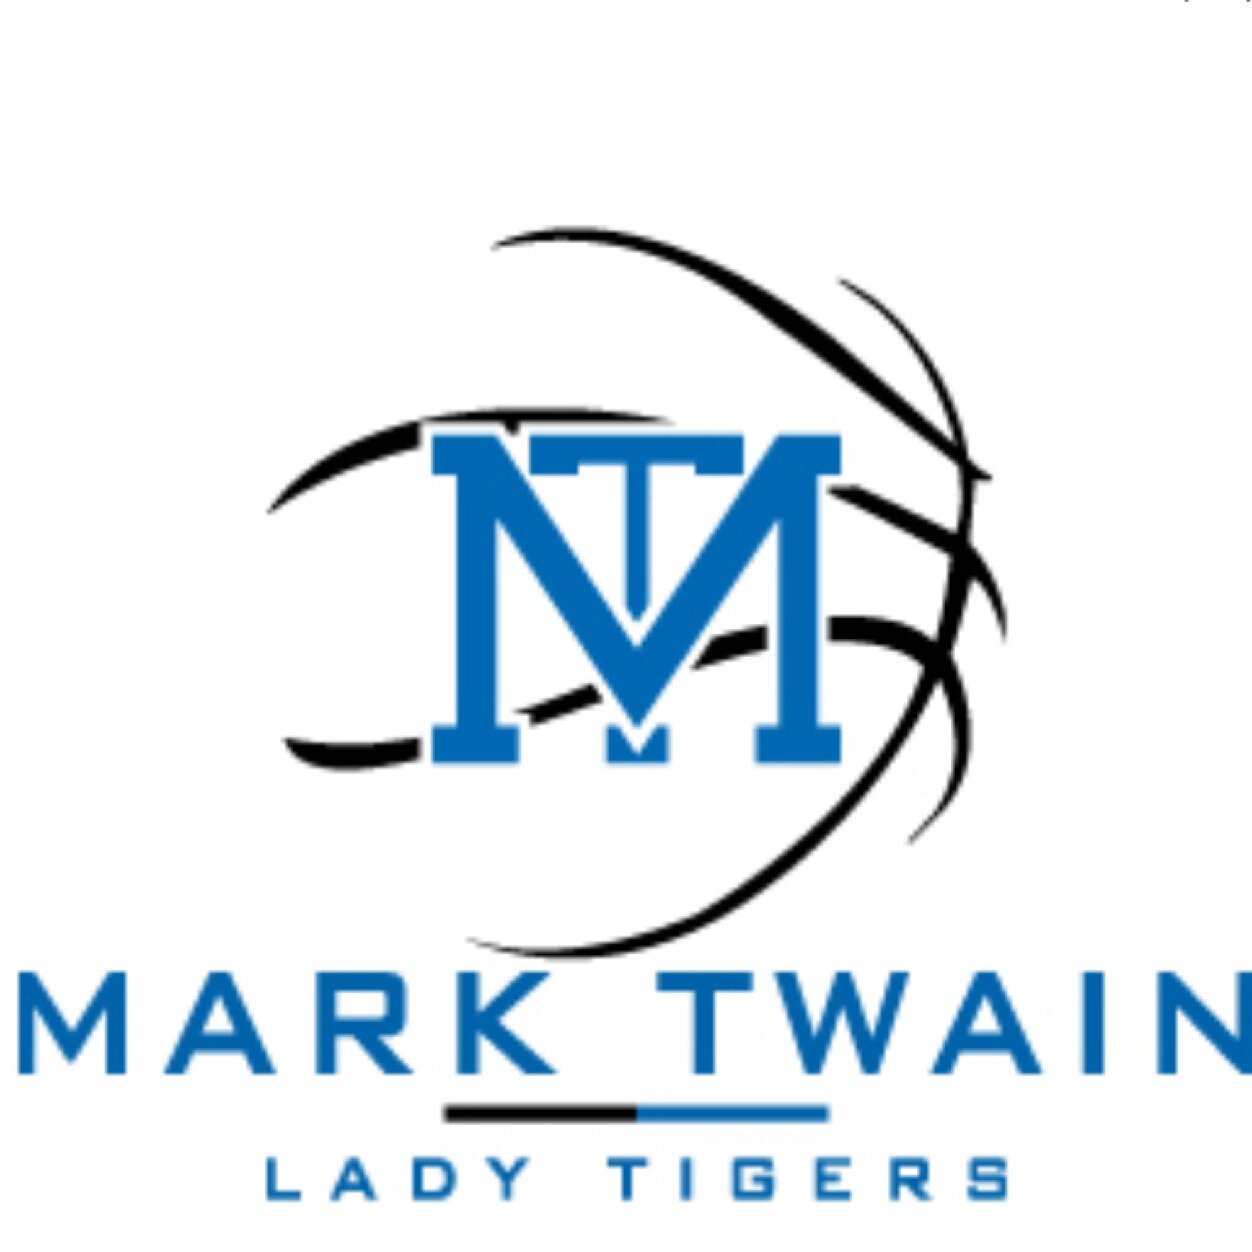 Official account for Mark Twain Lady Tigers basketball